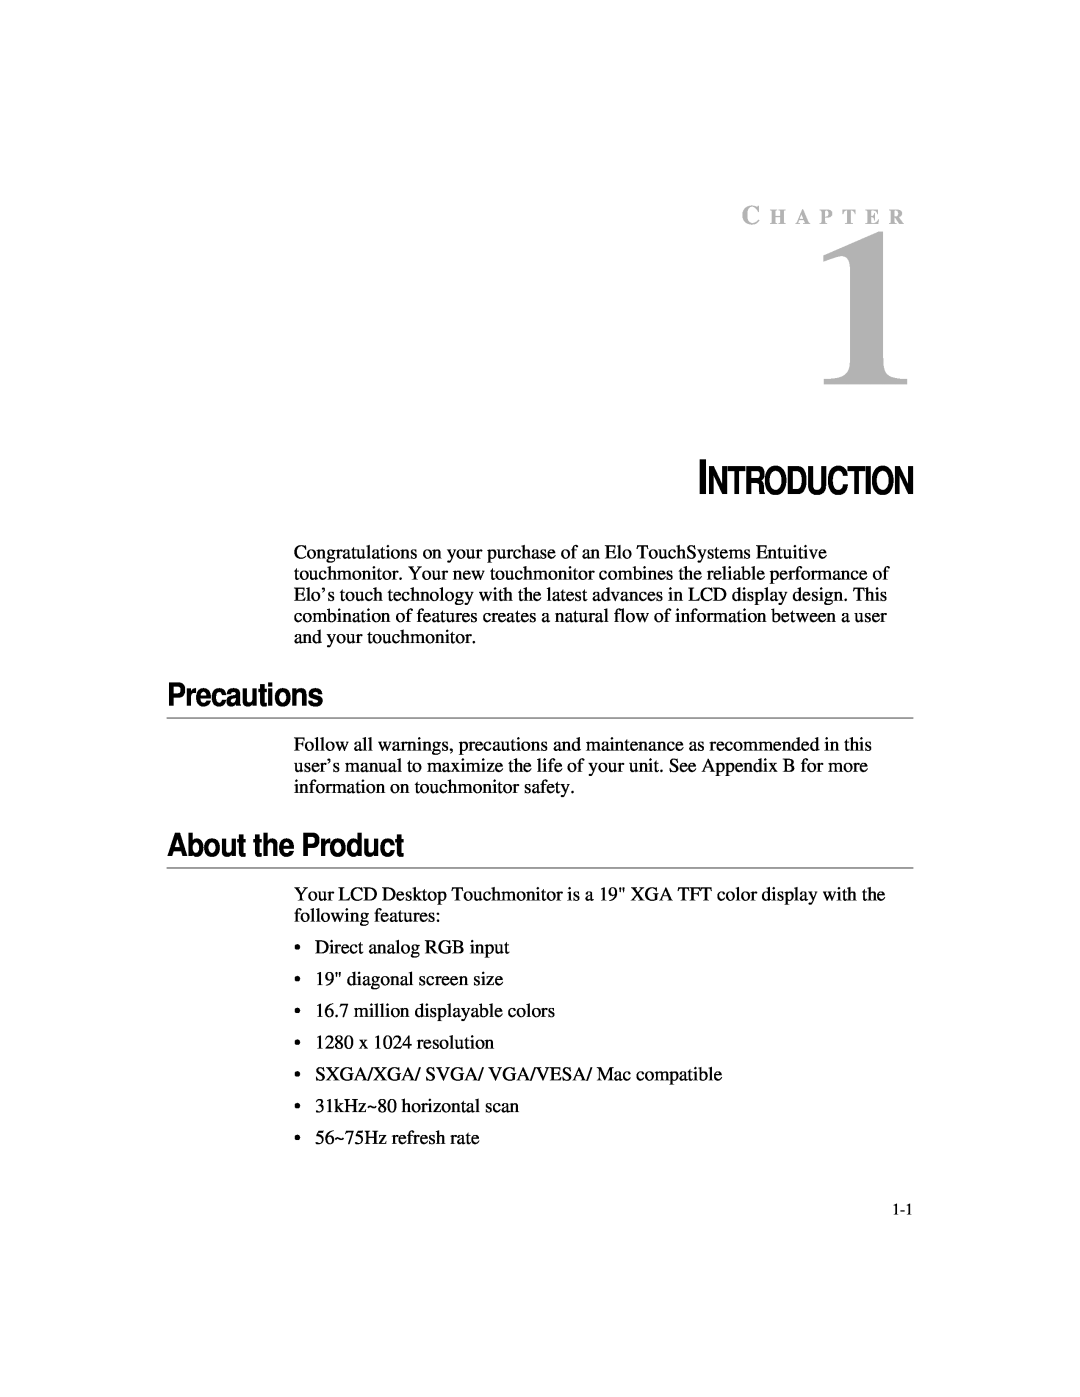 Elo TouchSystems 1925L manual Introduction, Precautions, About the Product, C H A P T E R 